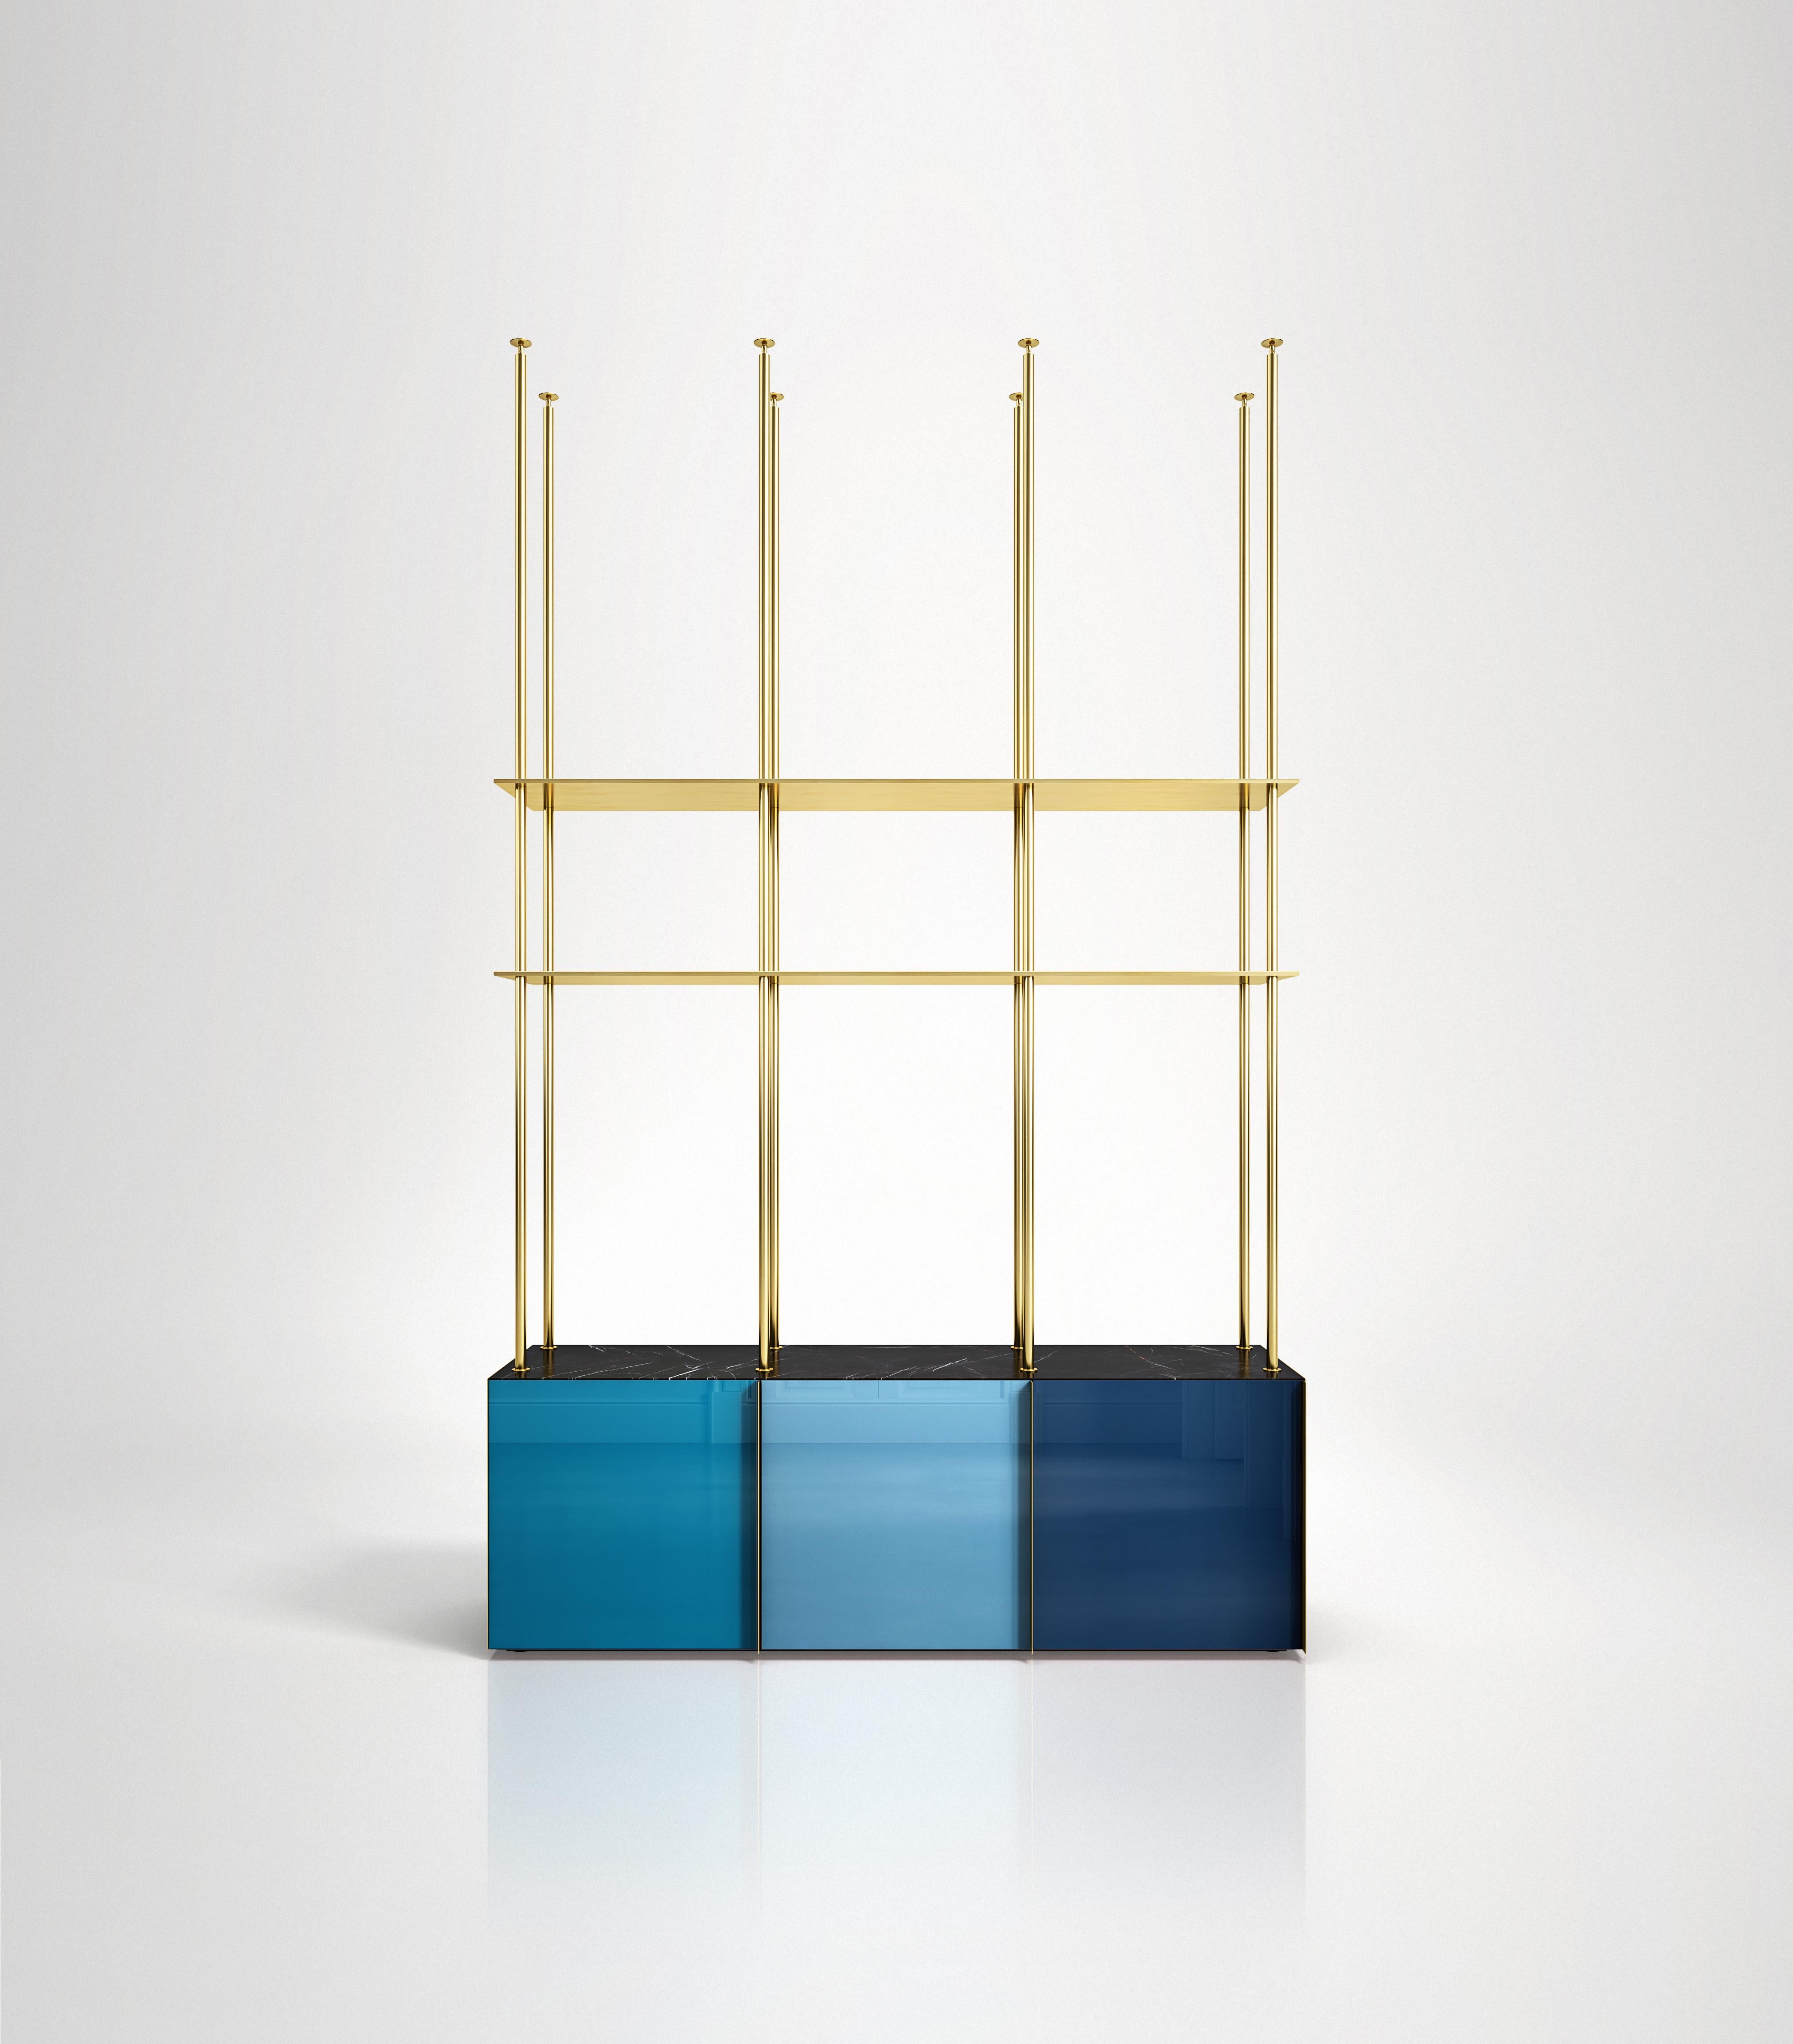 Bookcase 01
Floor to ceiling bookcase featuring 3 back-painted glass doors colored in cold tones, marble or onyx top, lacquered wooden interior and brass shelving. Each of the three doors has a vertical brass handle and each compartment has an